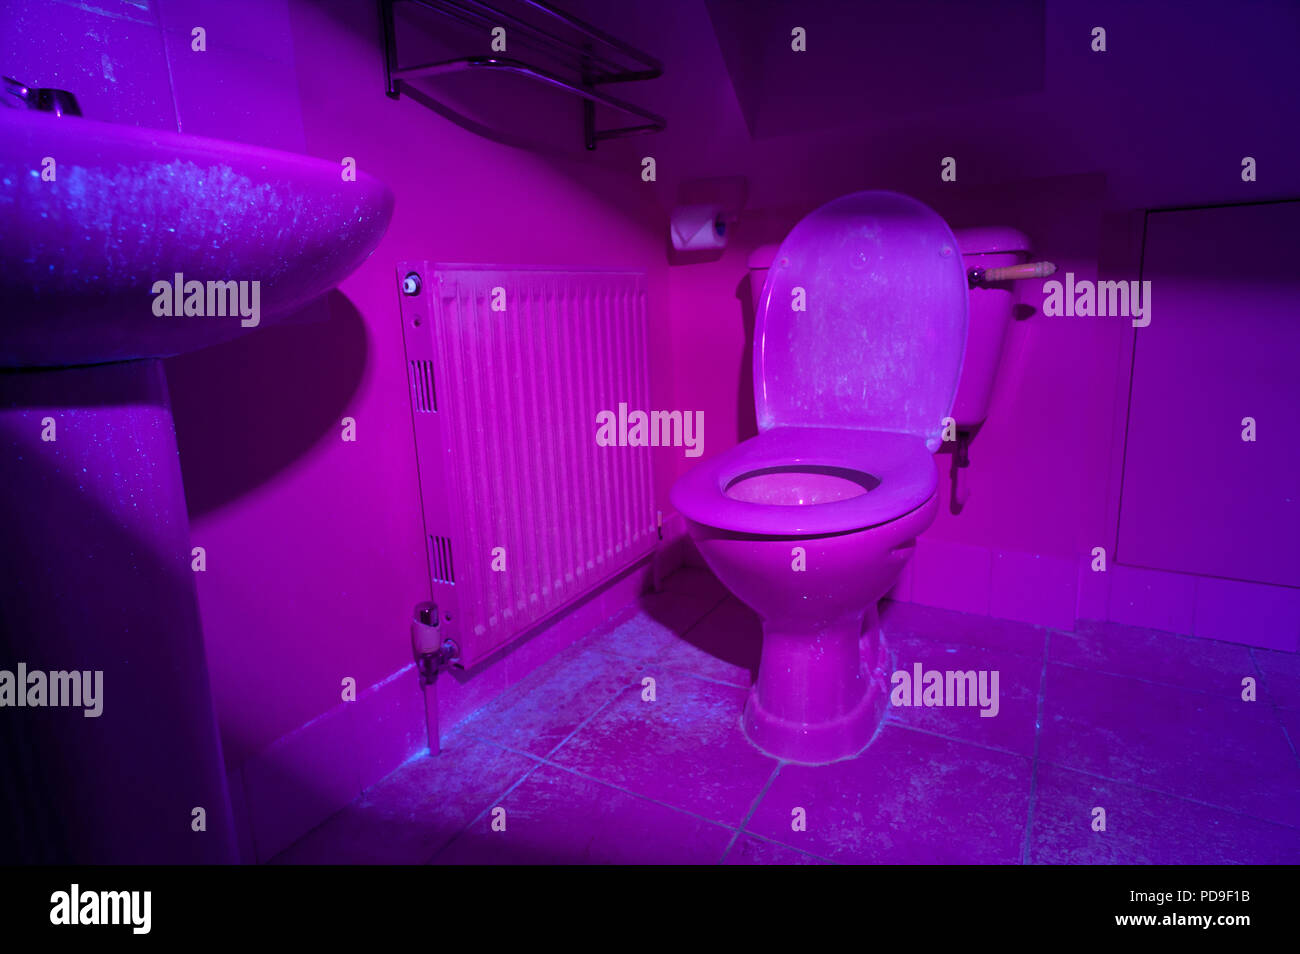 https://c8.alamy.com/comp/PD9F1B/moving-house-uv-induced-fluorescence-in-the-bathroom-which-seeded-perfectly-clean-in-visible-light-glowing-traces-of-body-fluids-from-previous-owner-PD9F1B.jpg